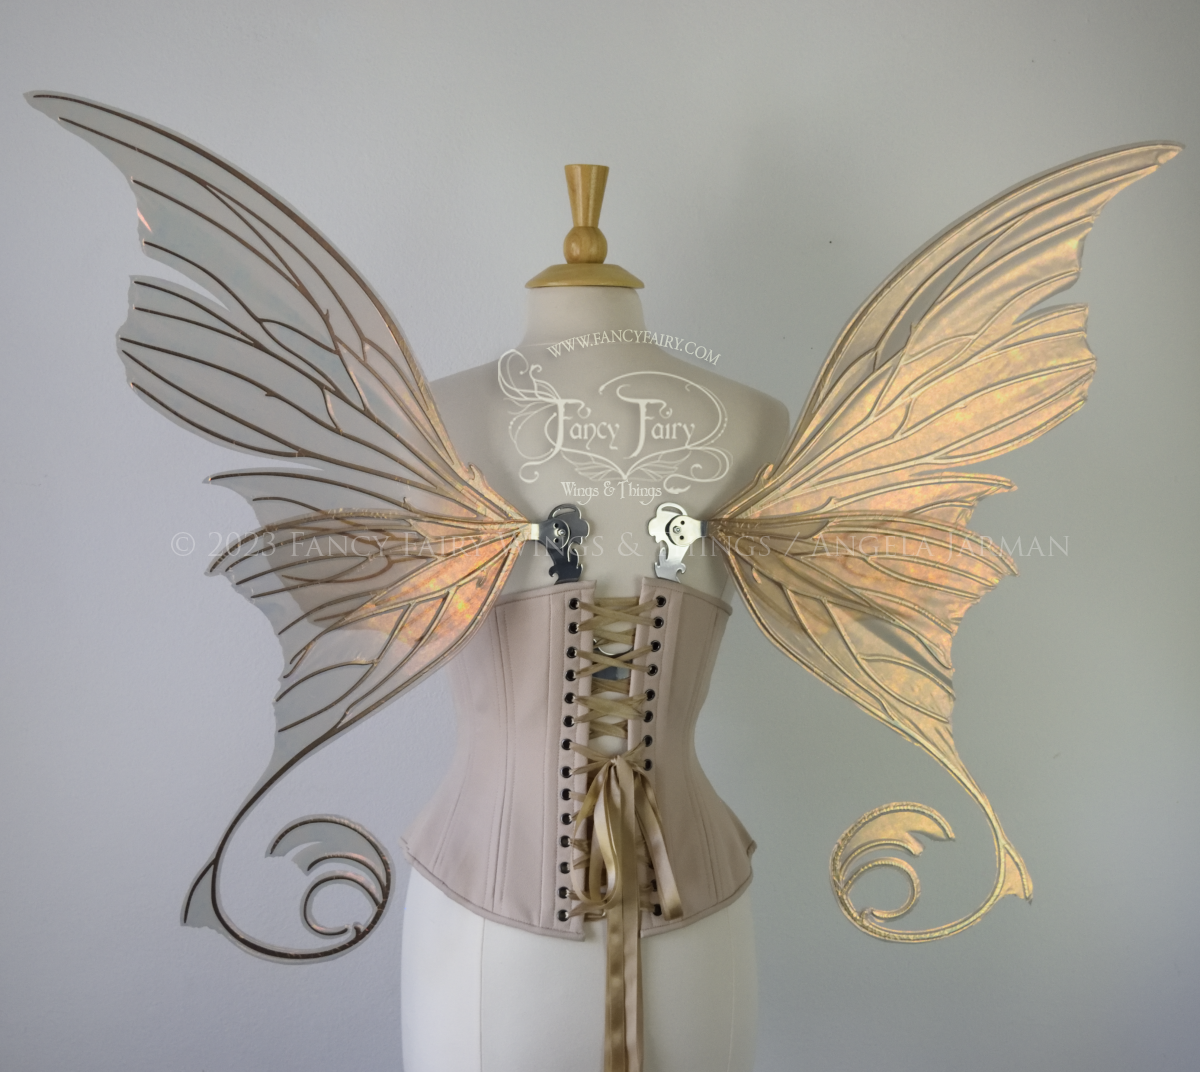 Back view of an ivory dress form wearing an alabaster underbust corset and large rose gold iridescent fairy wings with lots of intricate silver veins, some have 'thorns'. Upper panels curve slightly downwards along top edge with pointy tips, bottom panels have tails